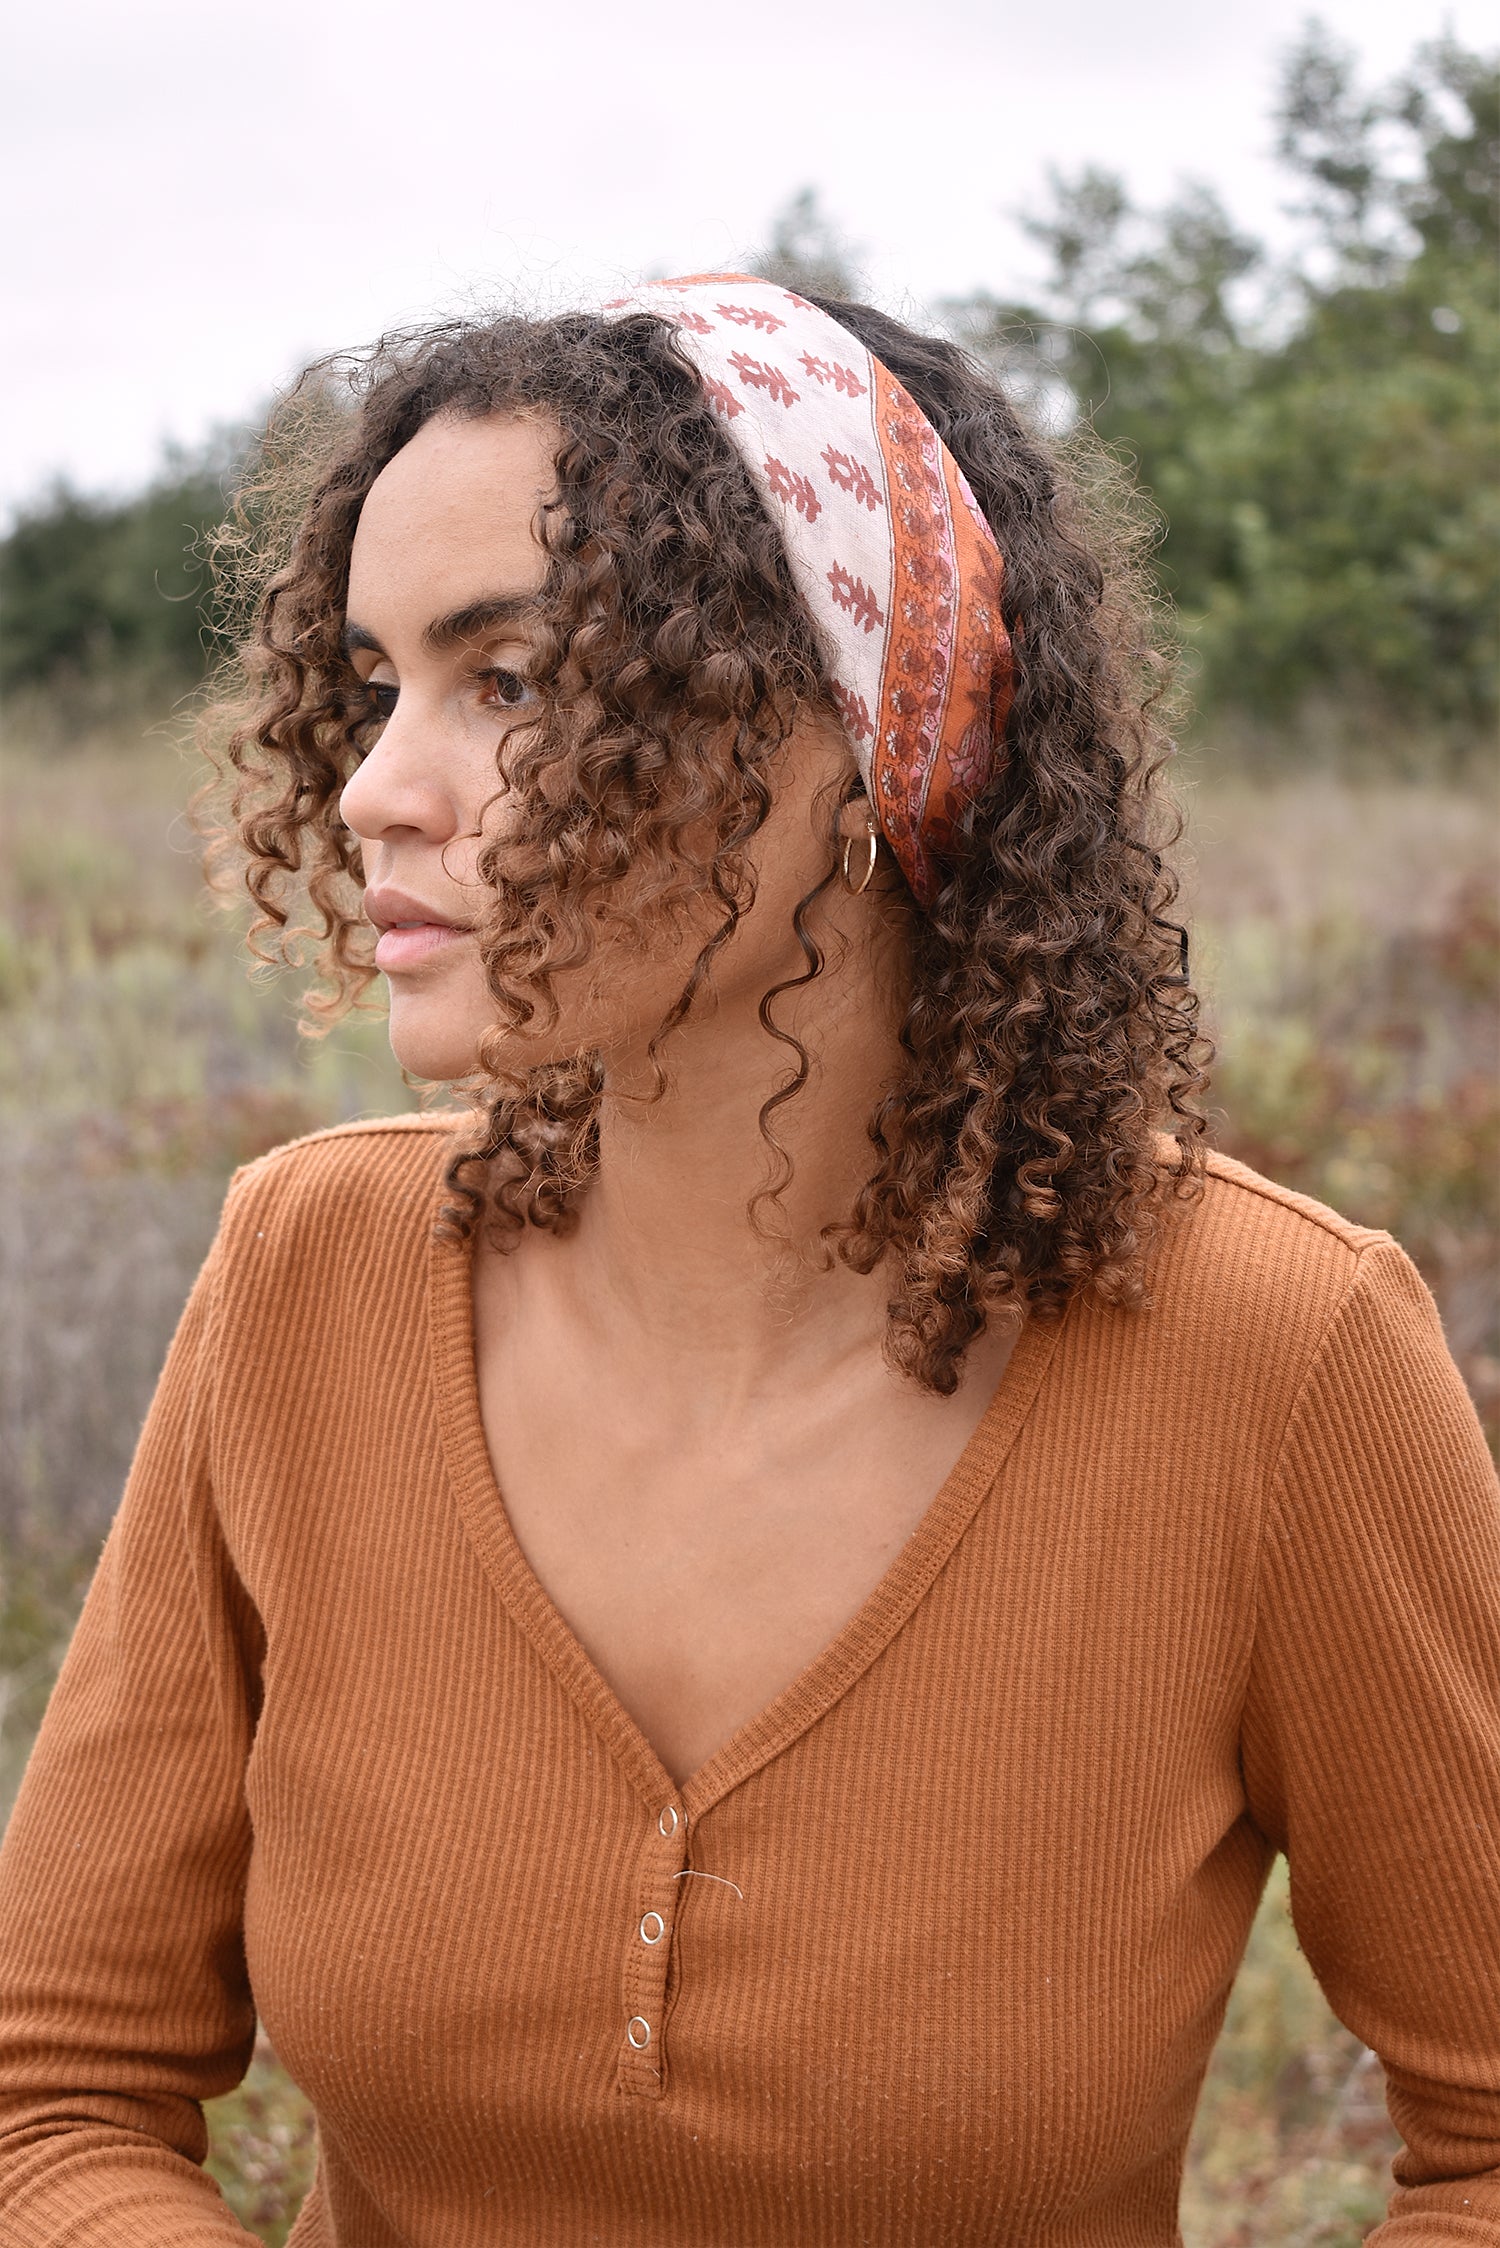 Woman wearing an orange long sleeve top, standing behind a wooden fence with trees in the background, with the block print Rory cotton bandana tied around her hair as a headband.